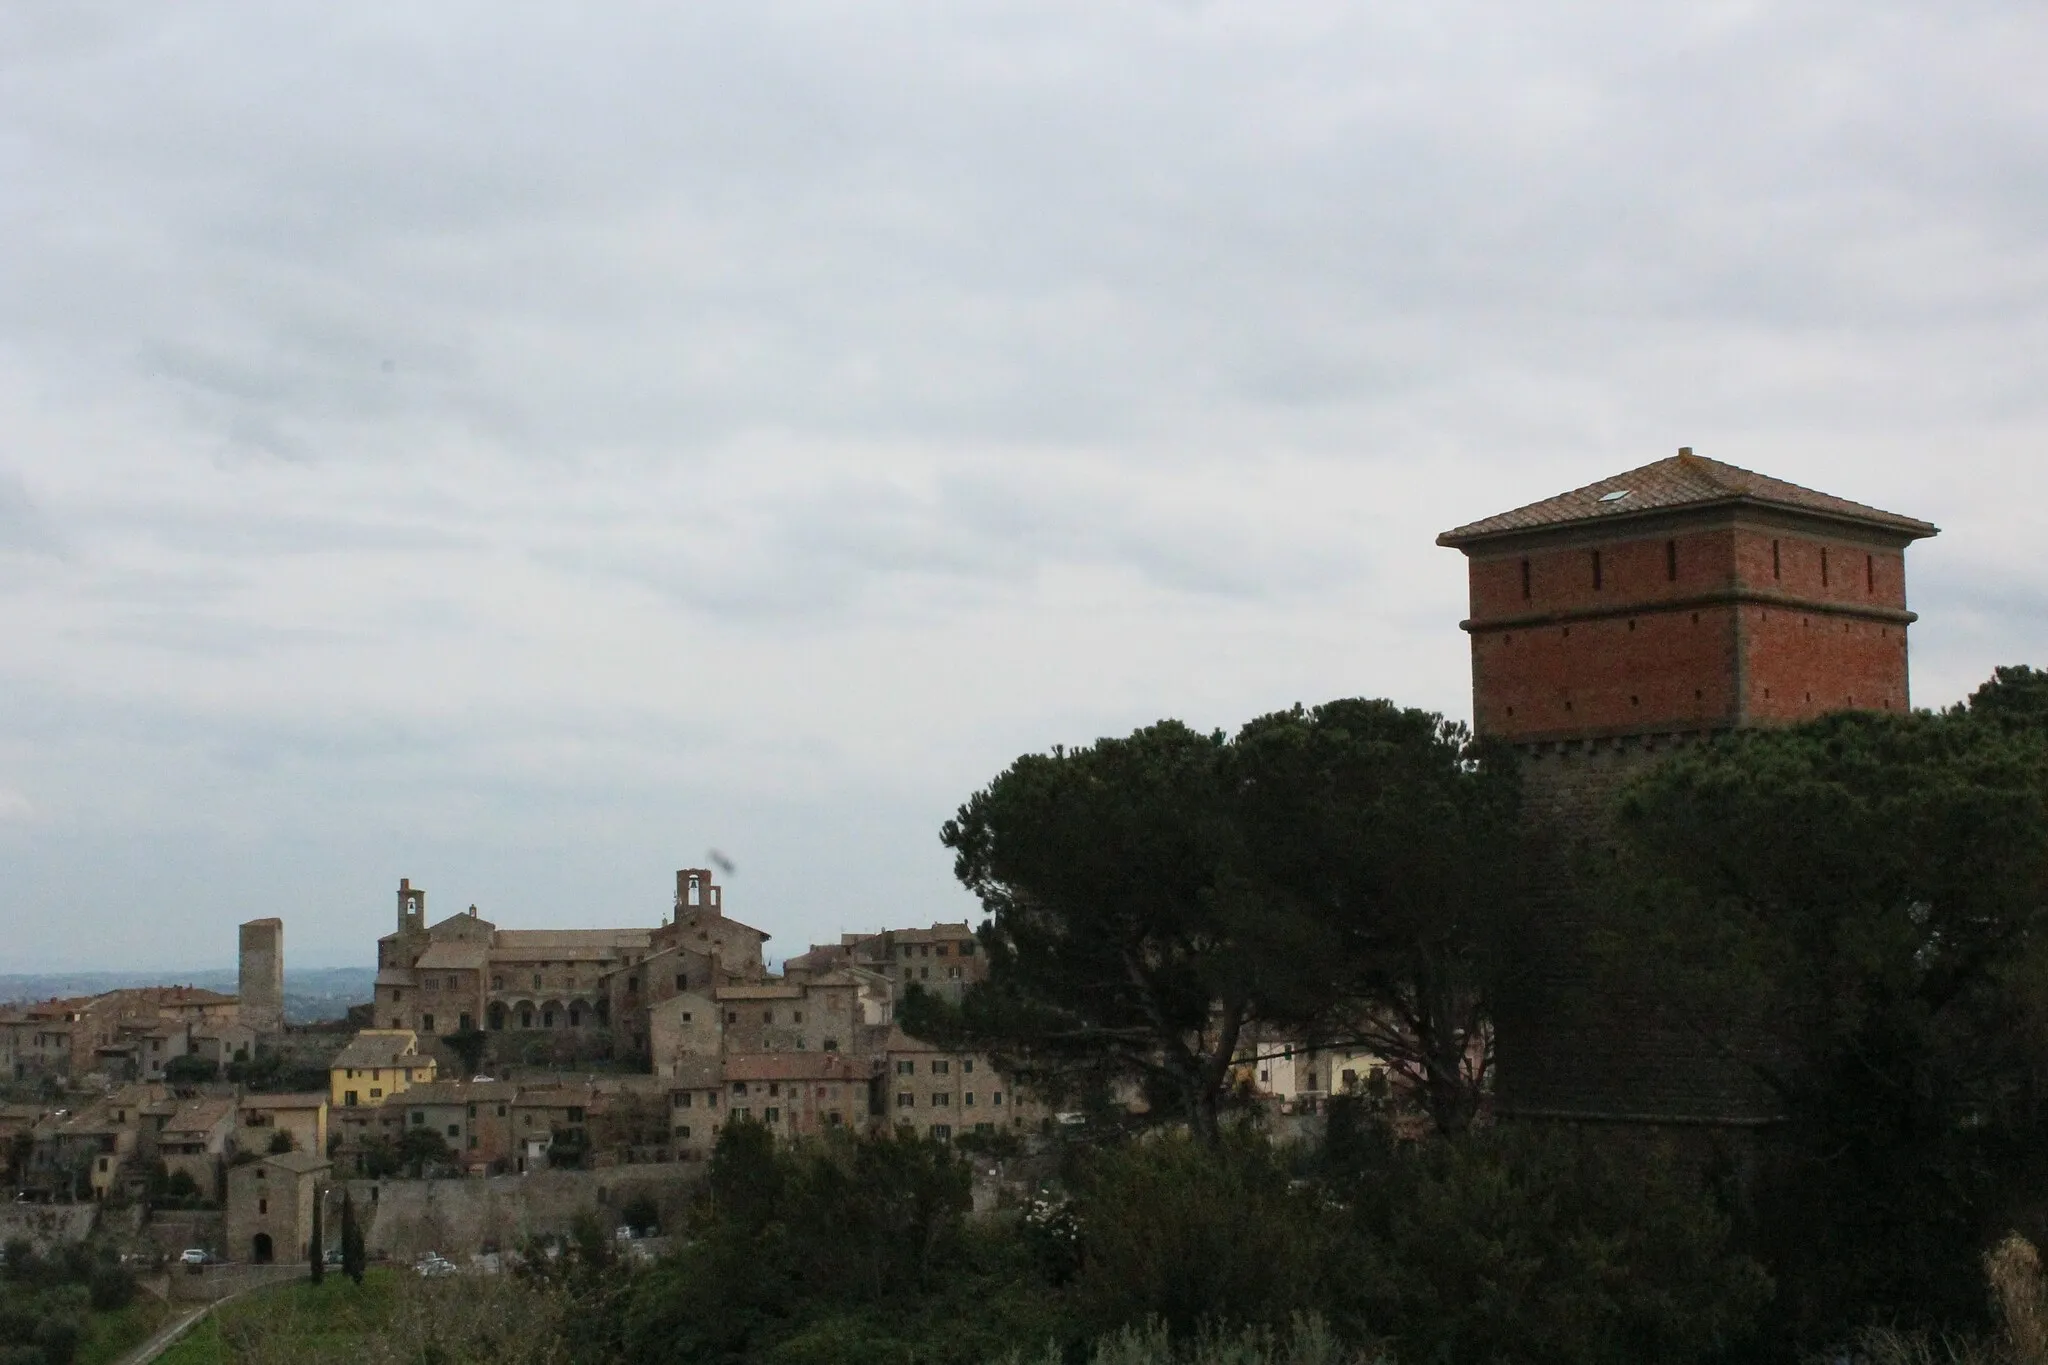 Photo showing: Central Tower of the Fortezza Medicea, just outside the city center of Lucignano, Valdichiana, Province of Arezzo, Tuscany, Italy
(left side: Panorama of Lucignano with Torre delle Monache and the gate Porta Murata)